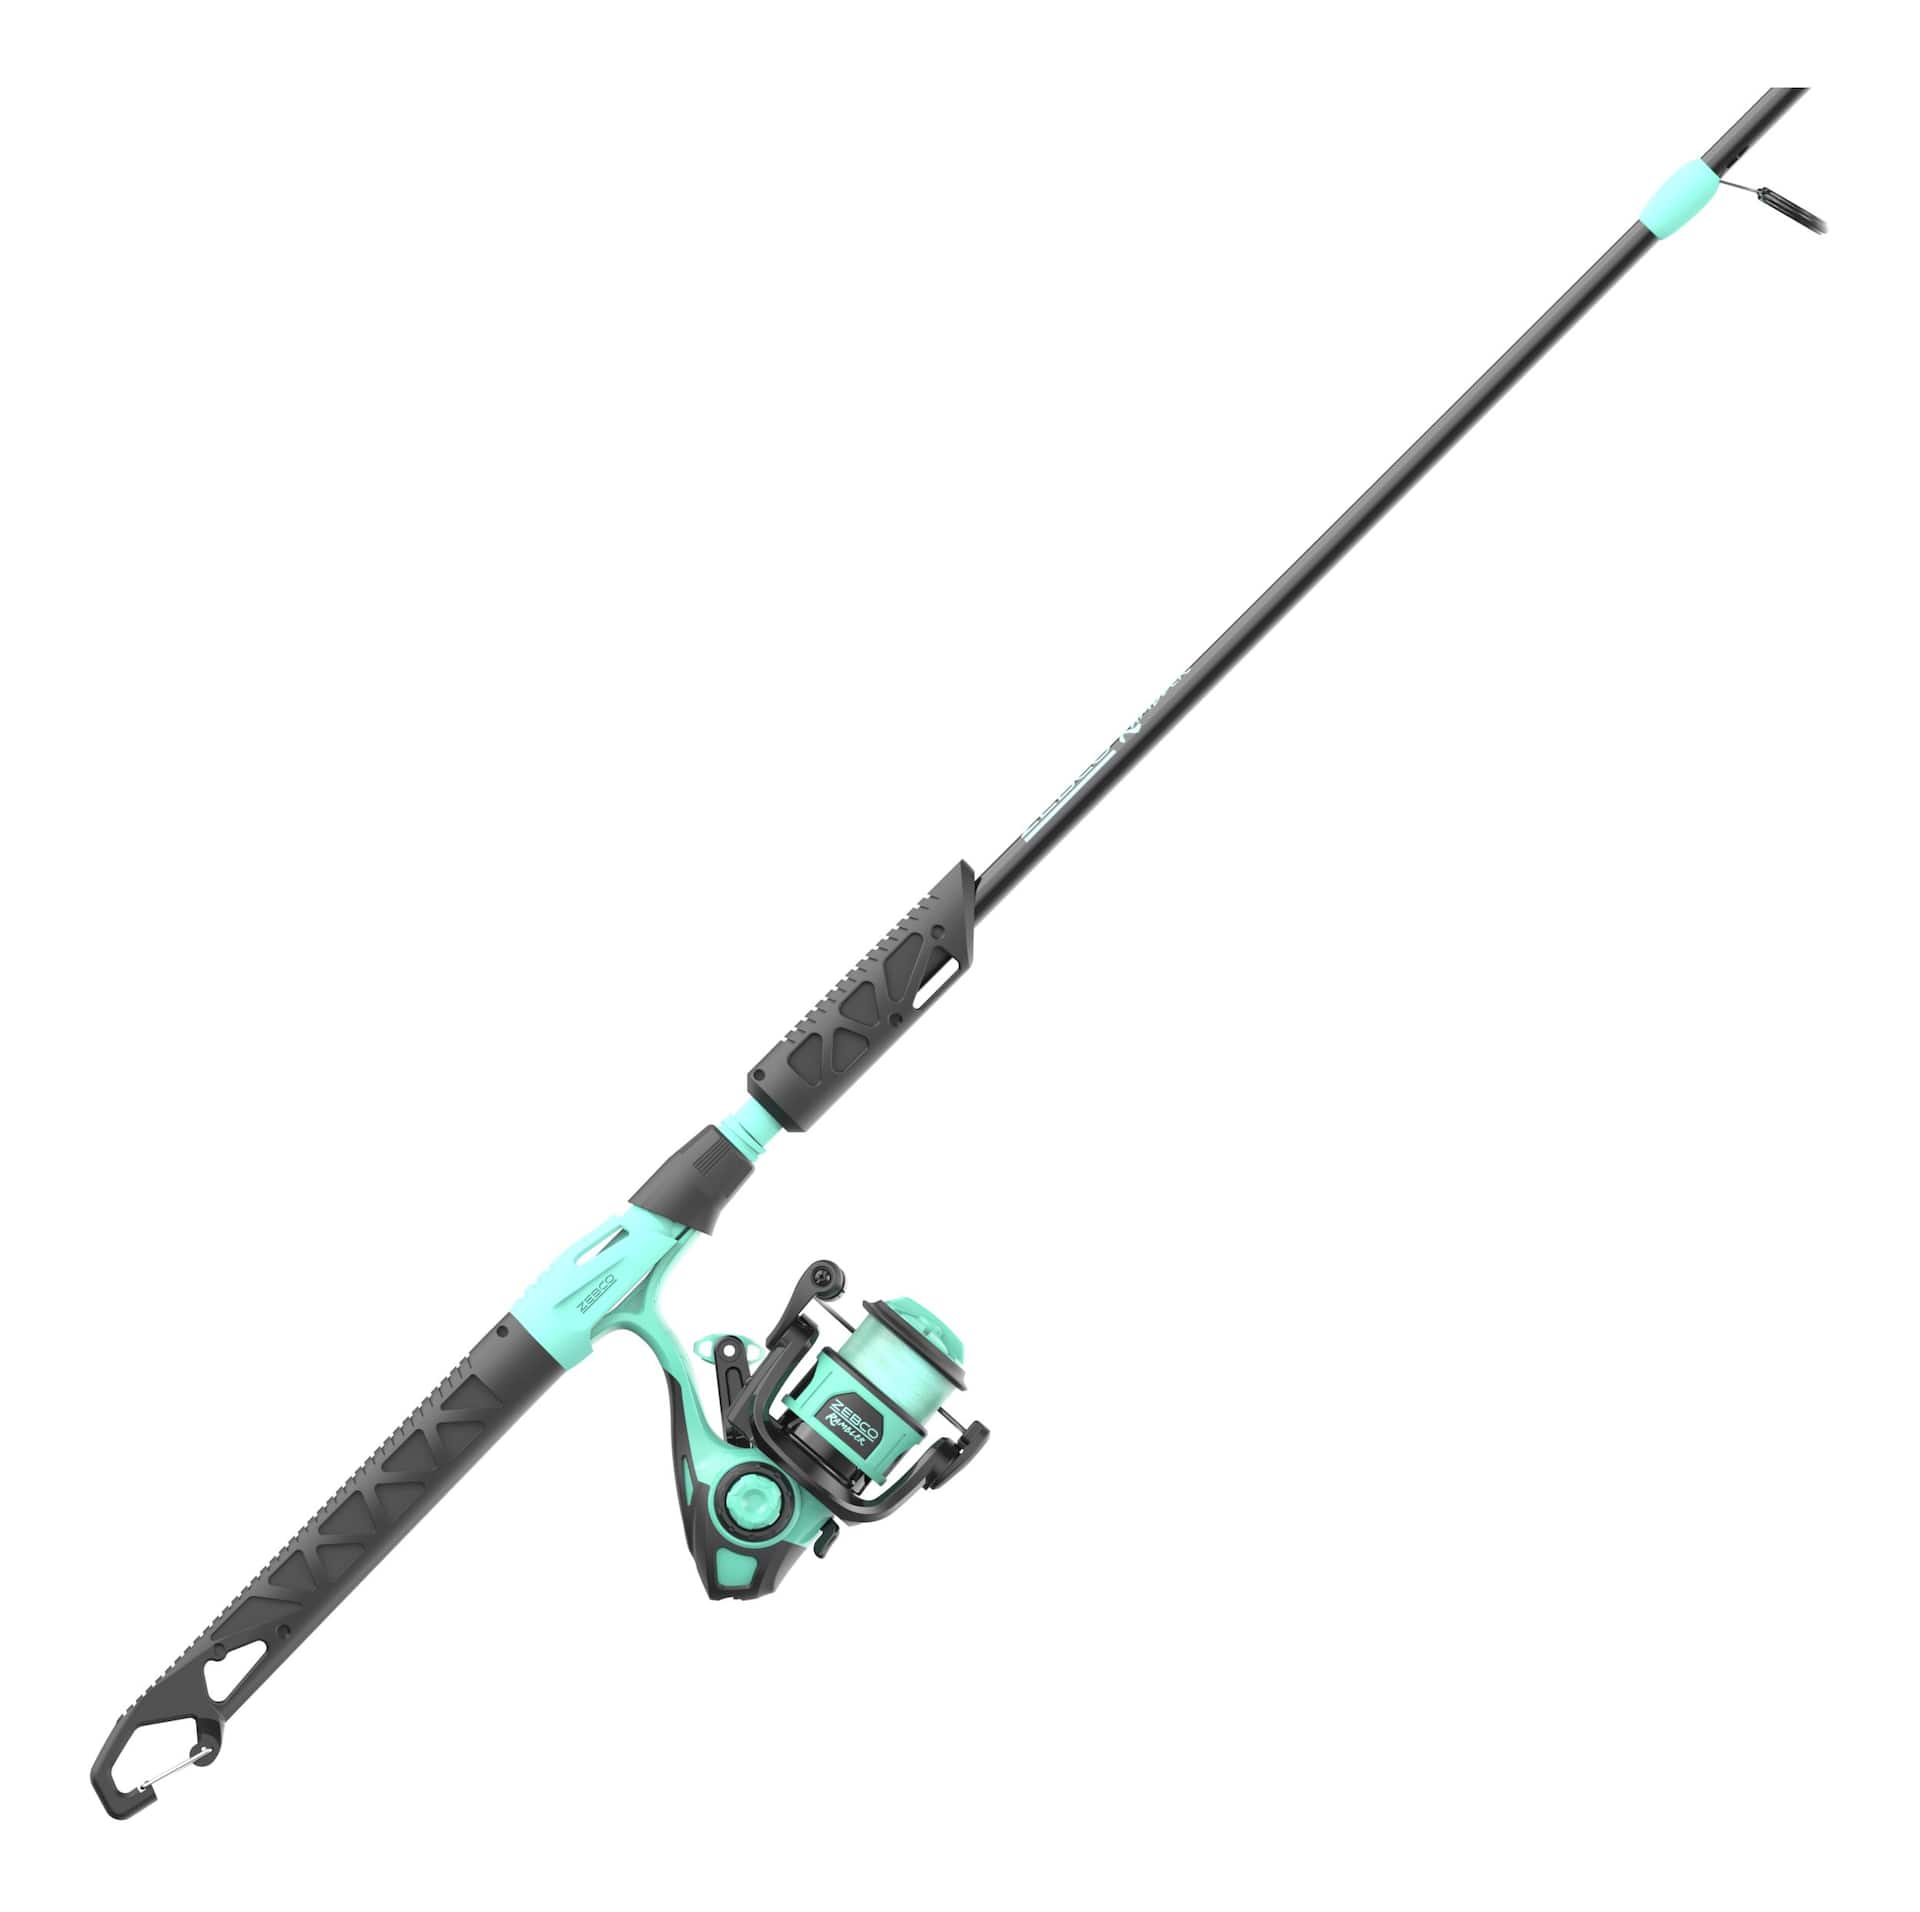  Zebco Slingshot Spinning Reel And Fishing Rod Combo, 5-Foot  6-Inch 2-Piece Fishing Pole, Size 20 Reel, Changeable Right- Or Left-Hand  Retrieve, Pre-Spooled